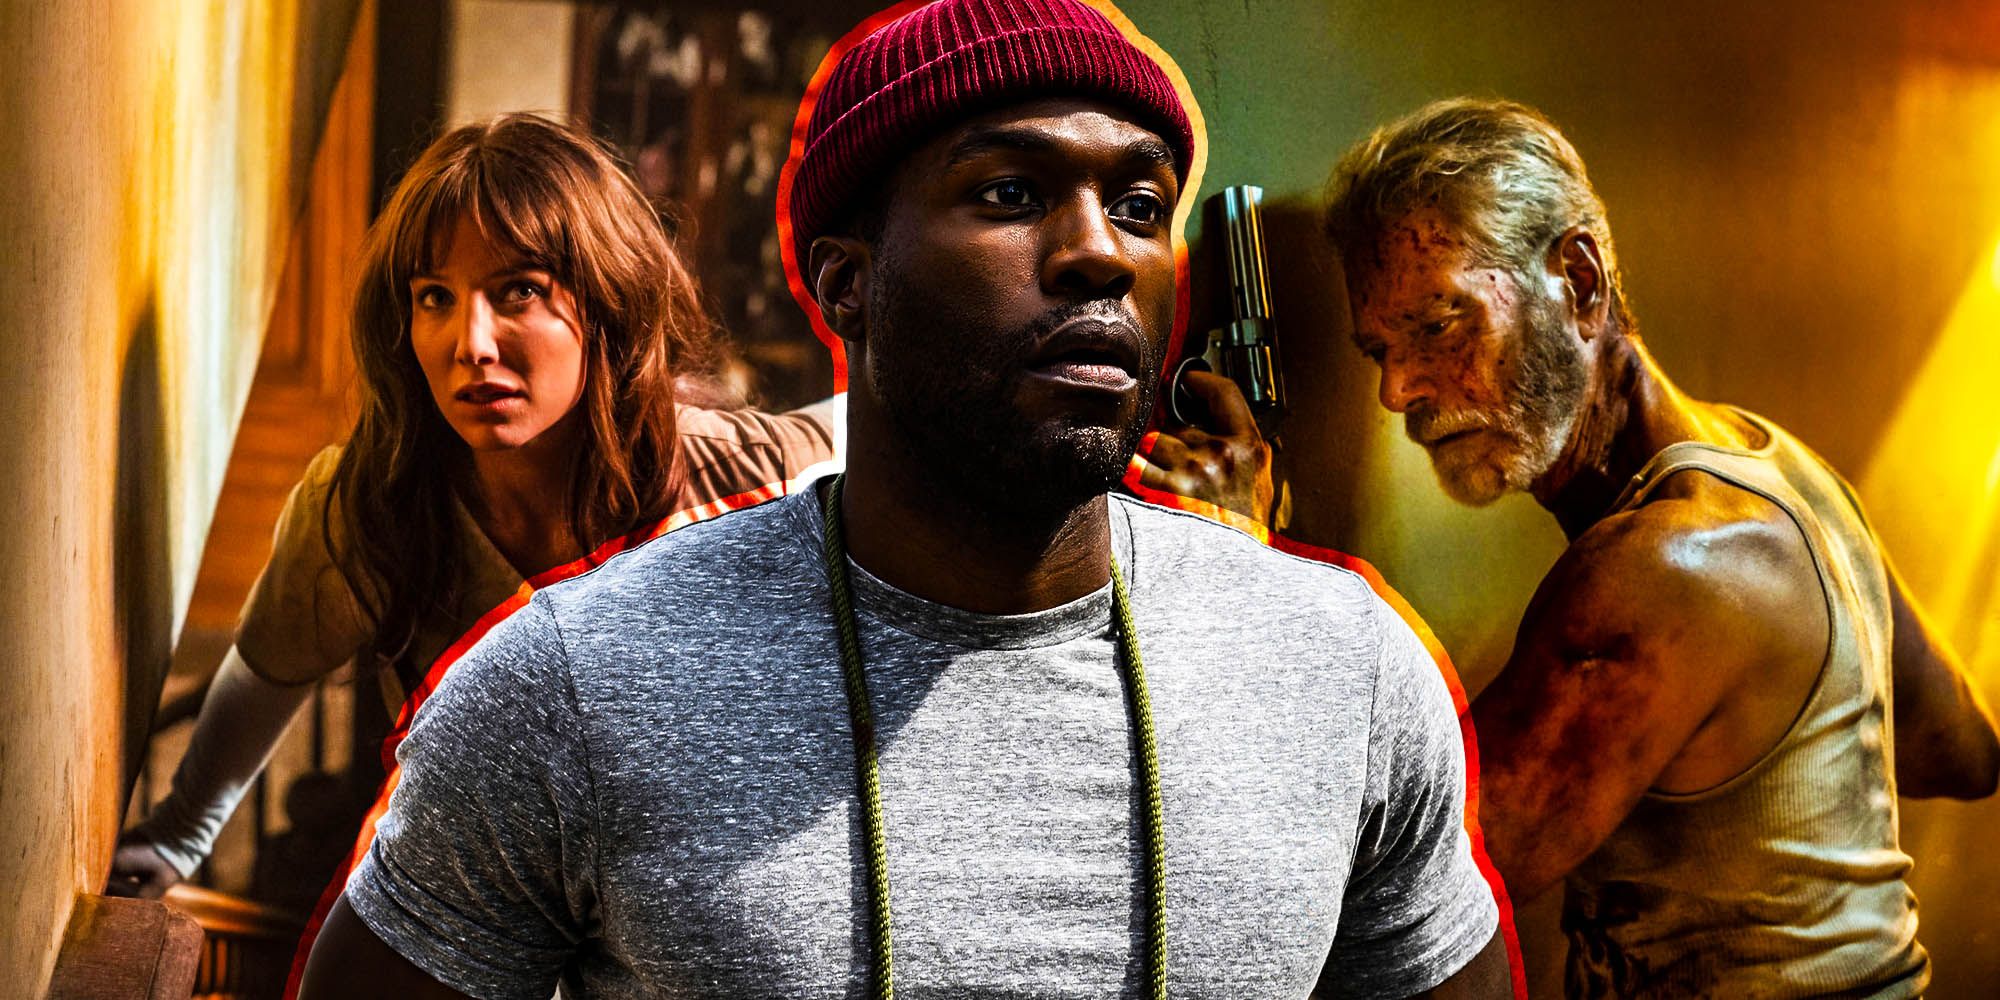 Why Horror Movies Are Doing So Well at the Box Office Right Now